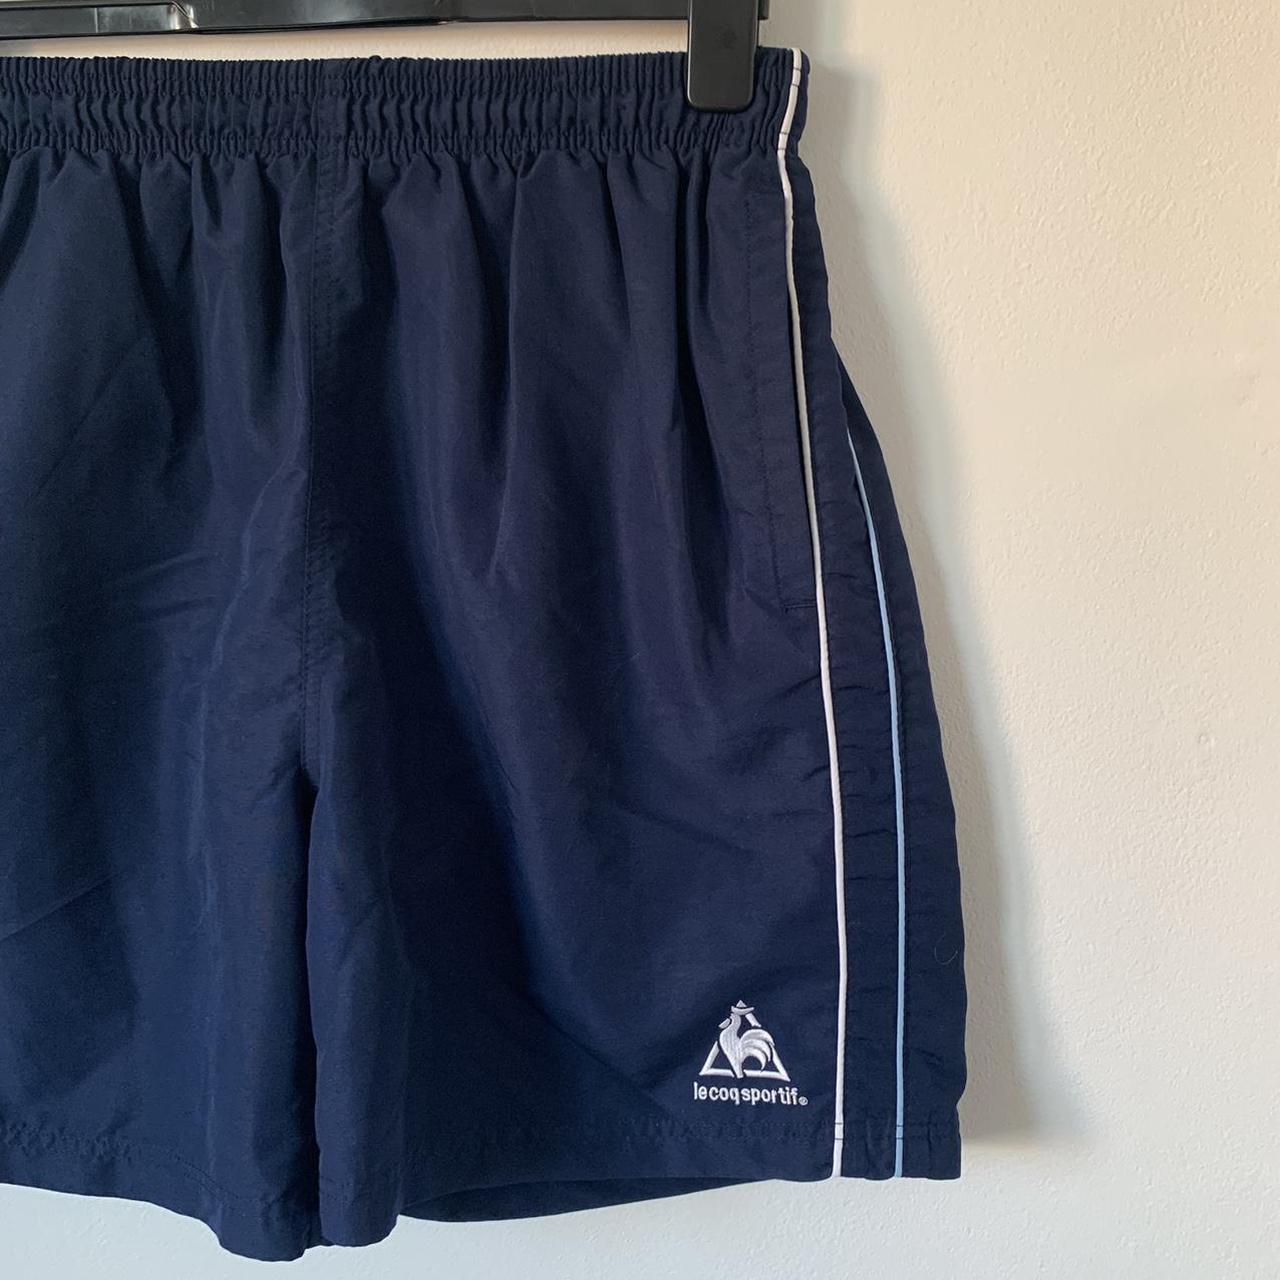 Product Image 2 - Le Coq Sportif shorts in